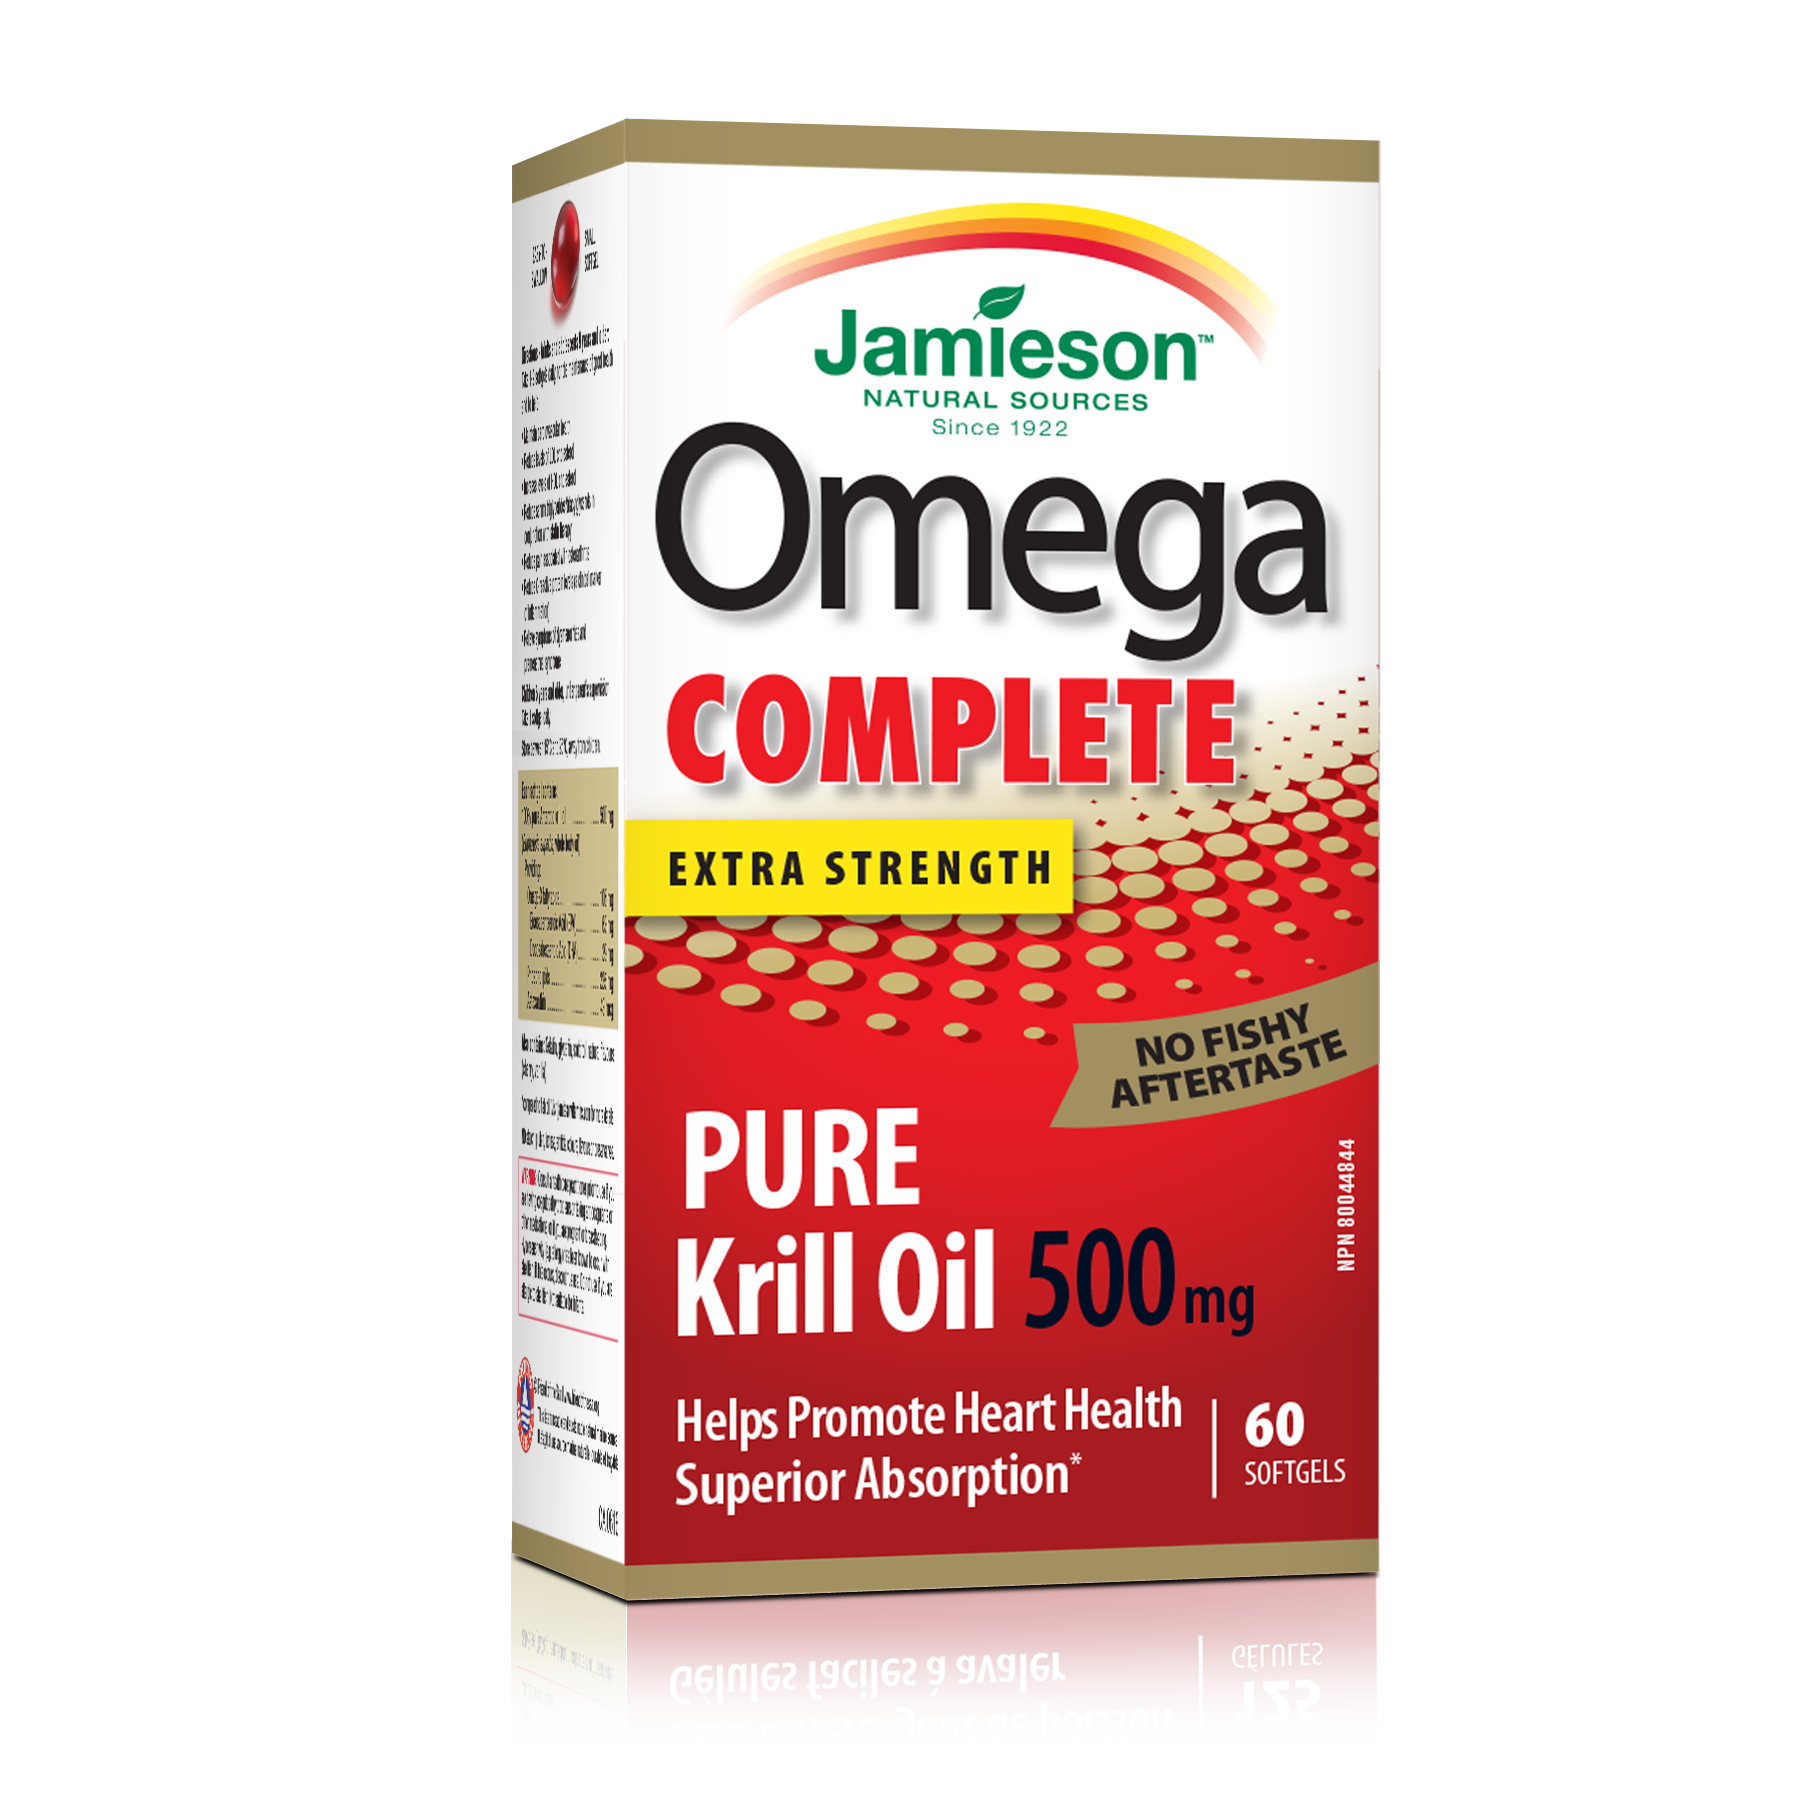 Omega Complete- Pure Krill Oil 500mg. 